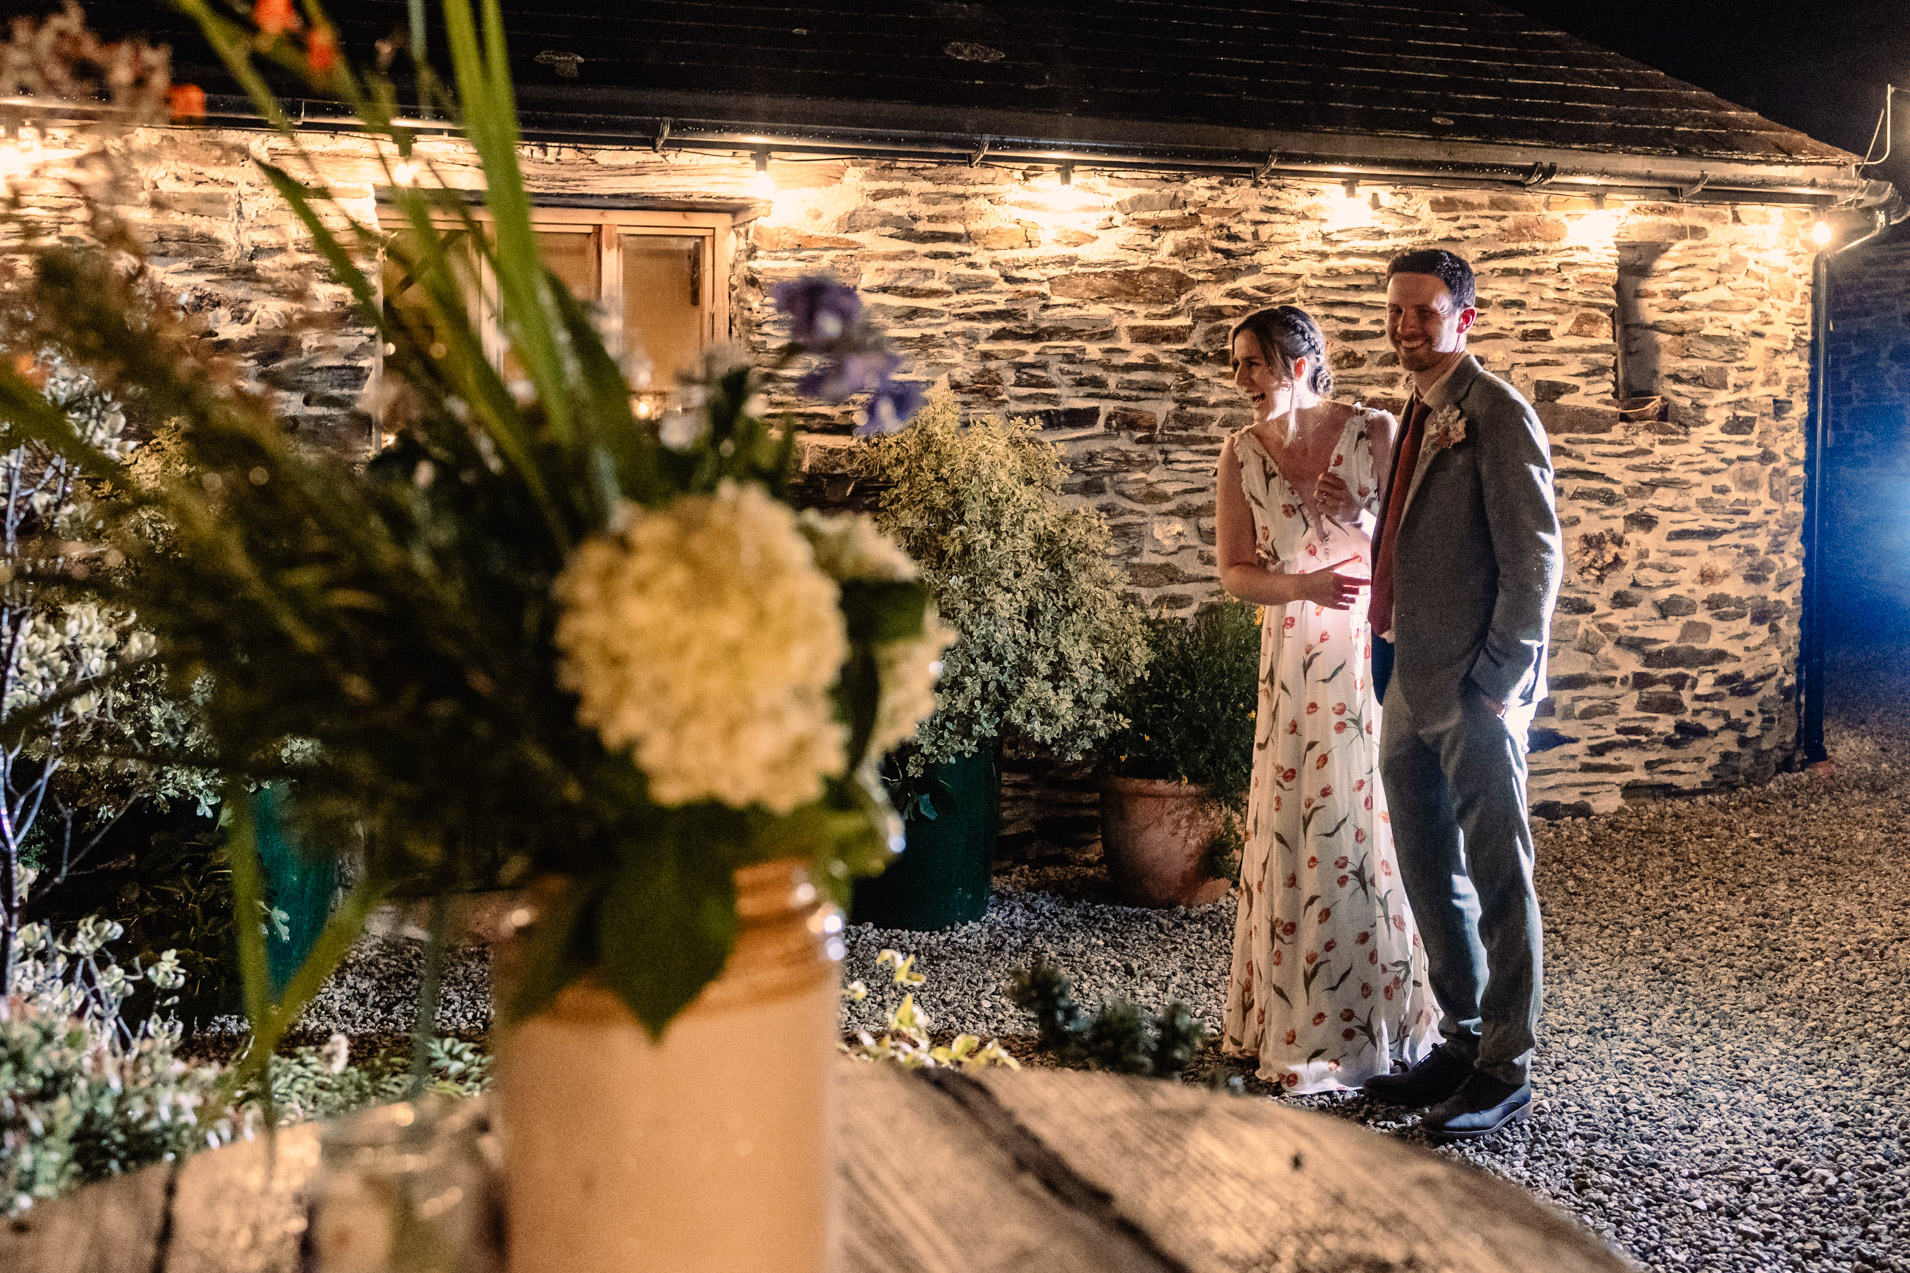 the couple enjoy themselves in the courtyard at night at wonwood barton